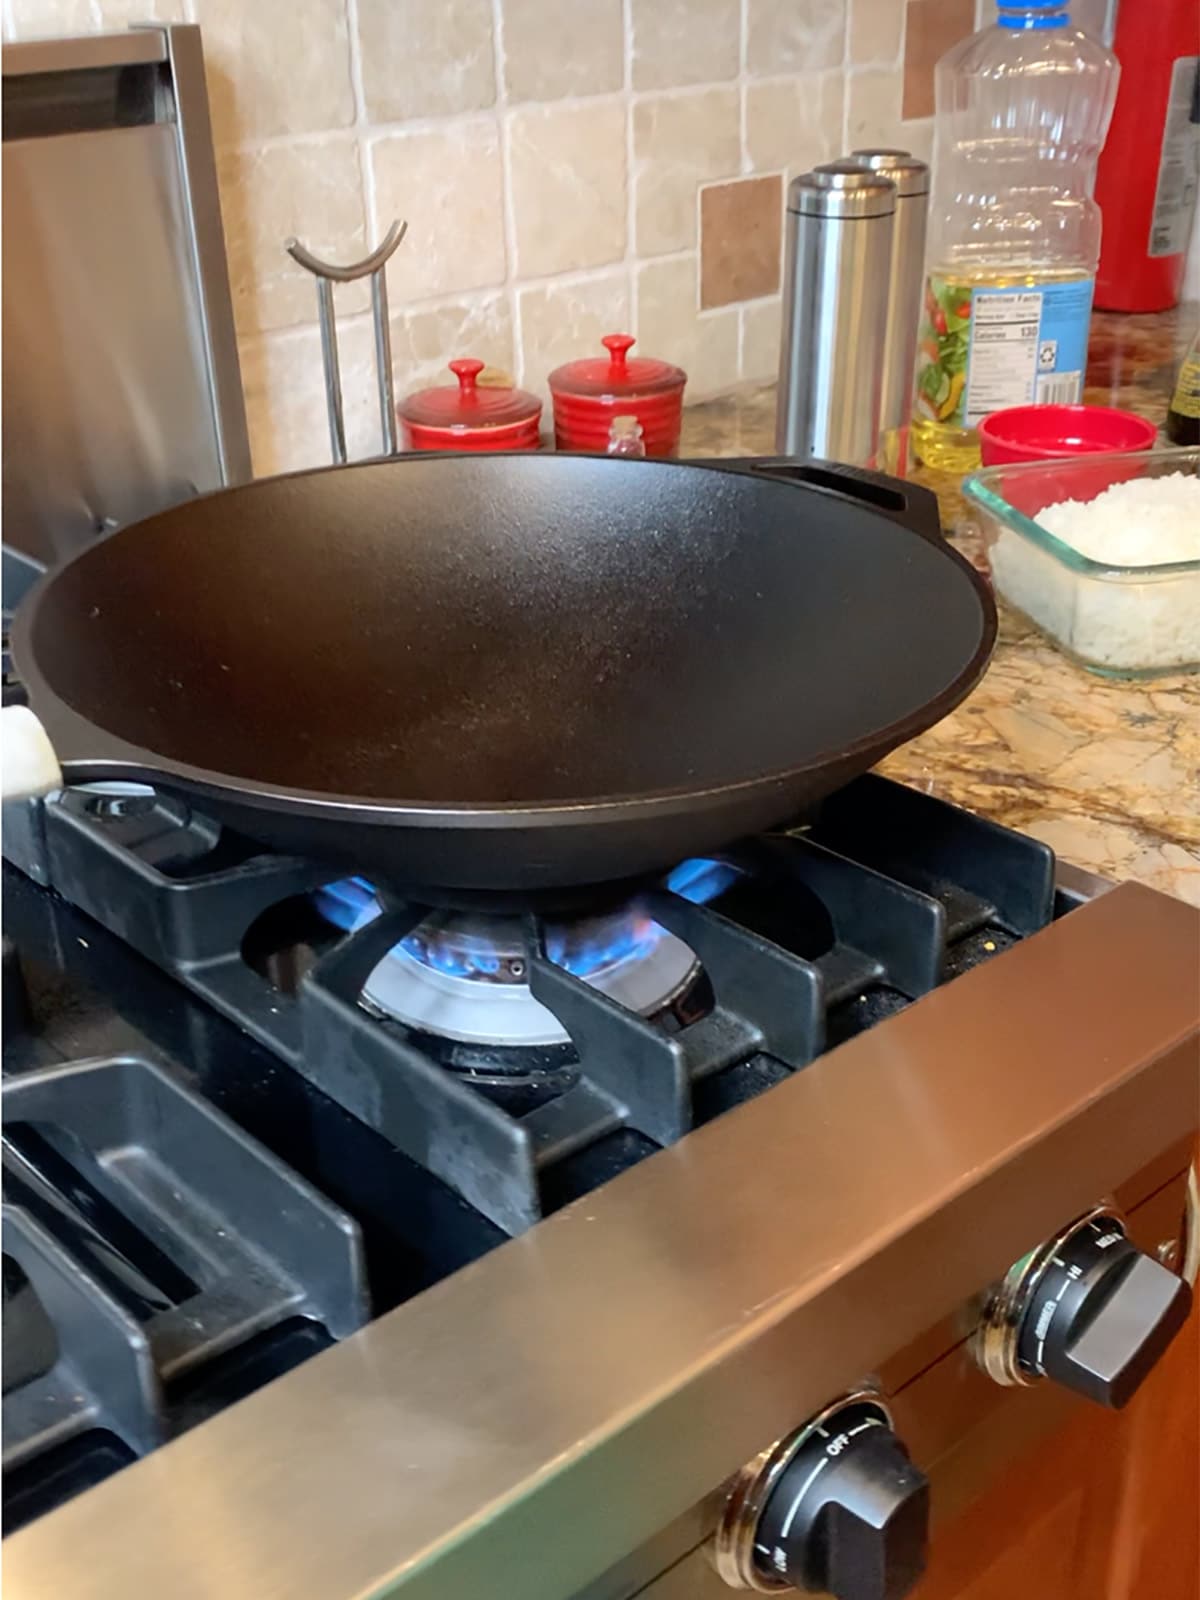 A cast iron wok heating up on stove top for leftover prime rib fried rice.